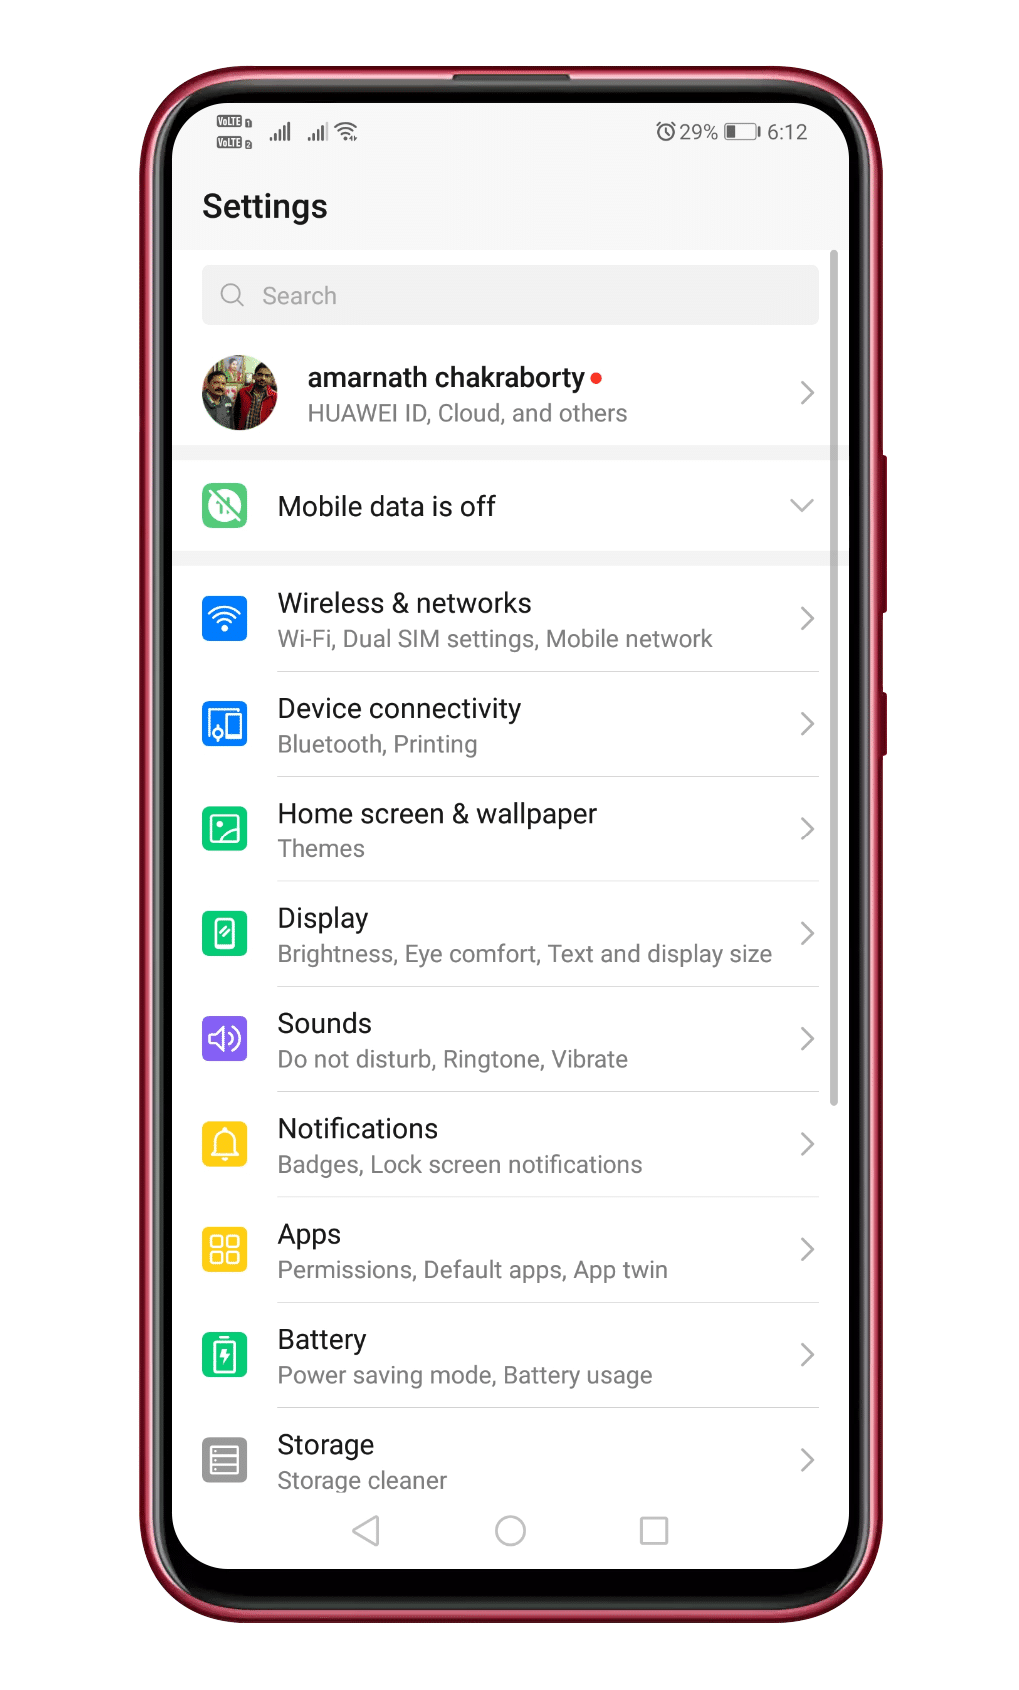 Open Settings on your Android